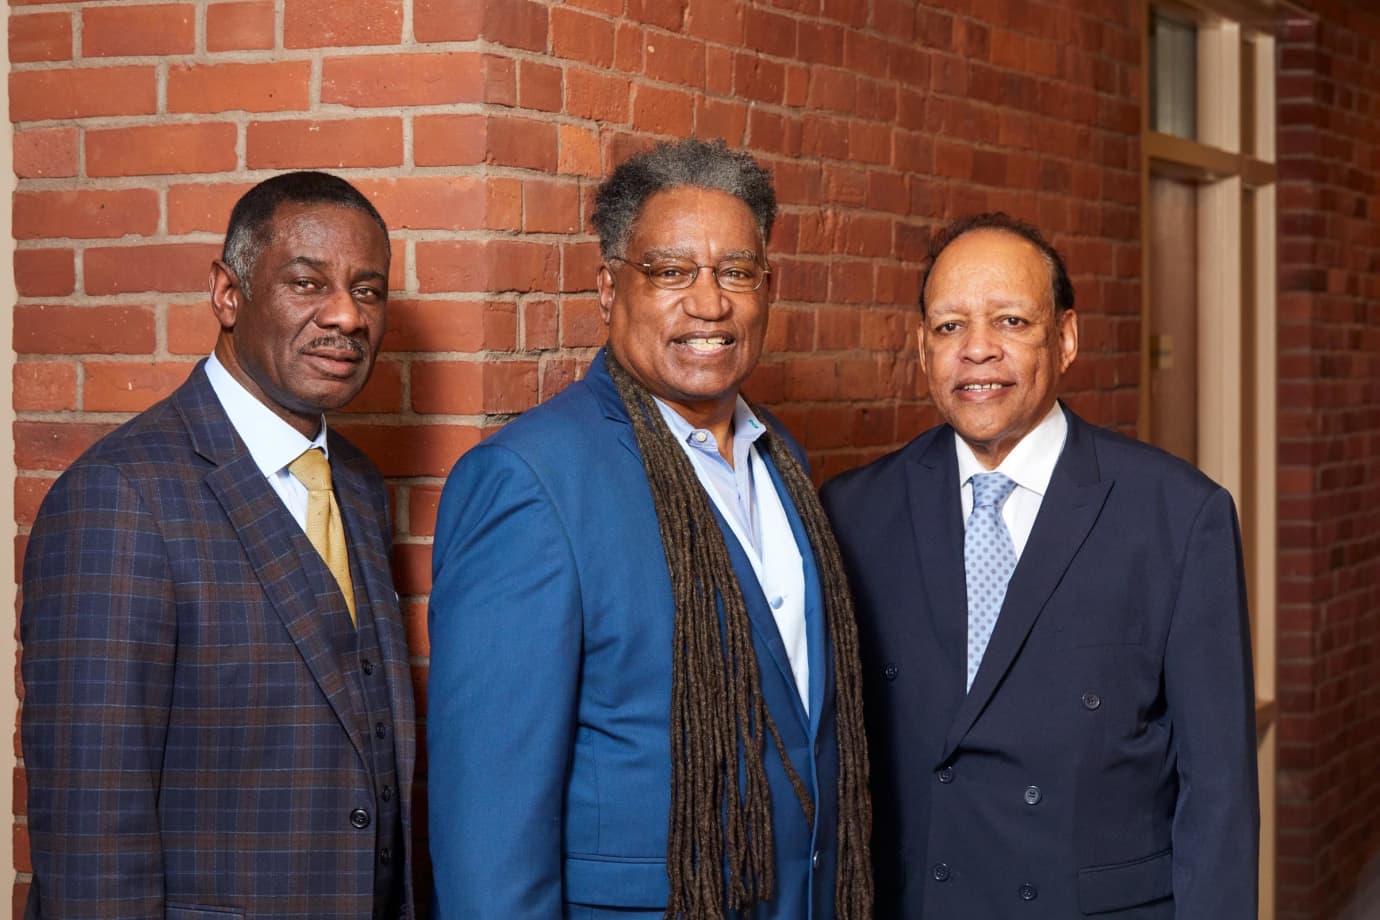 Reverend Elvin Clayton, Tom Ficklin, and Reverend Dr. Leroy O. Perry